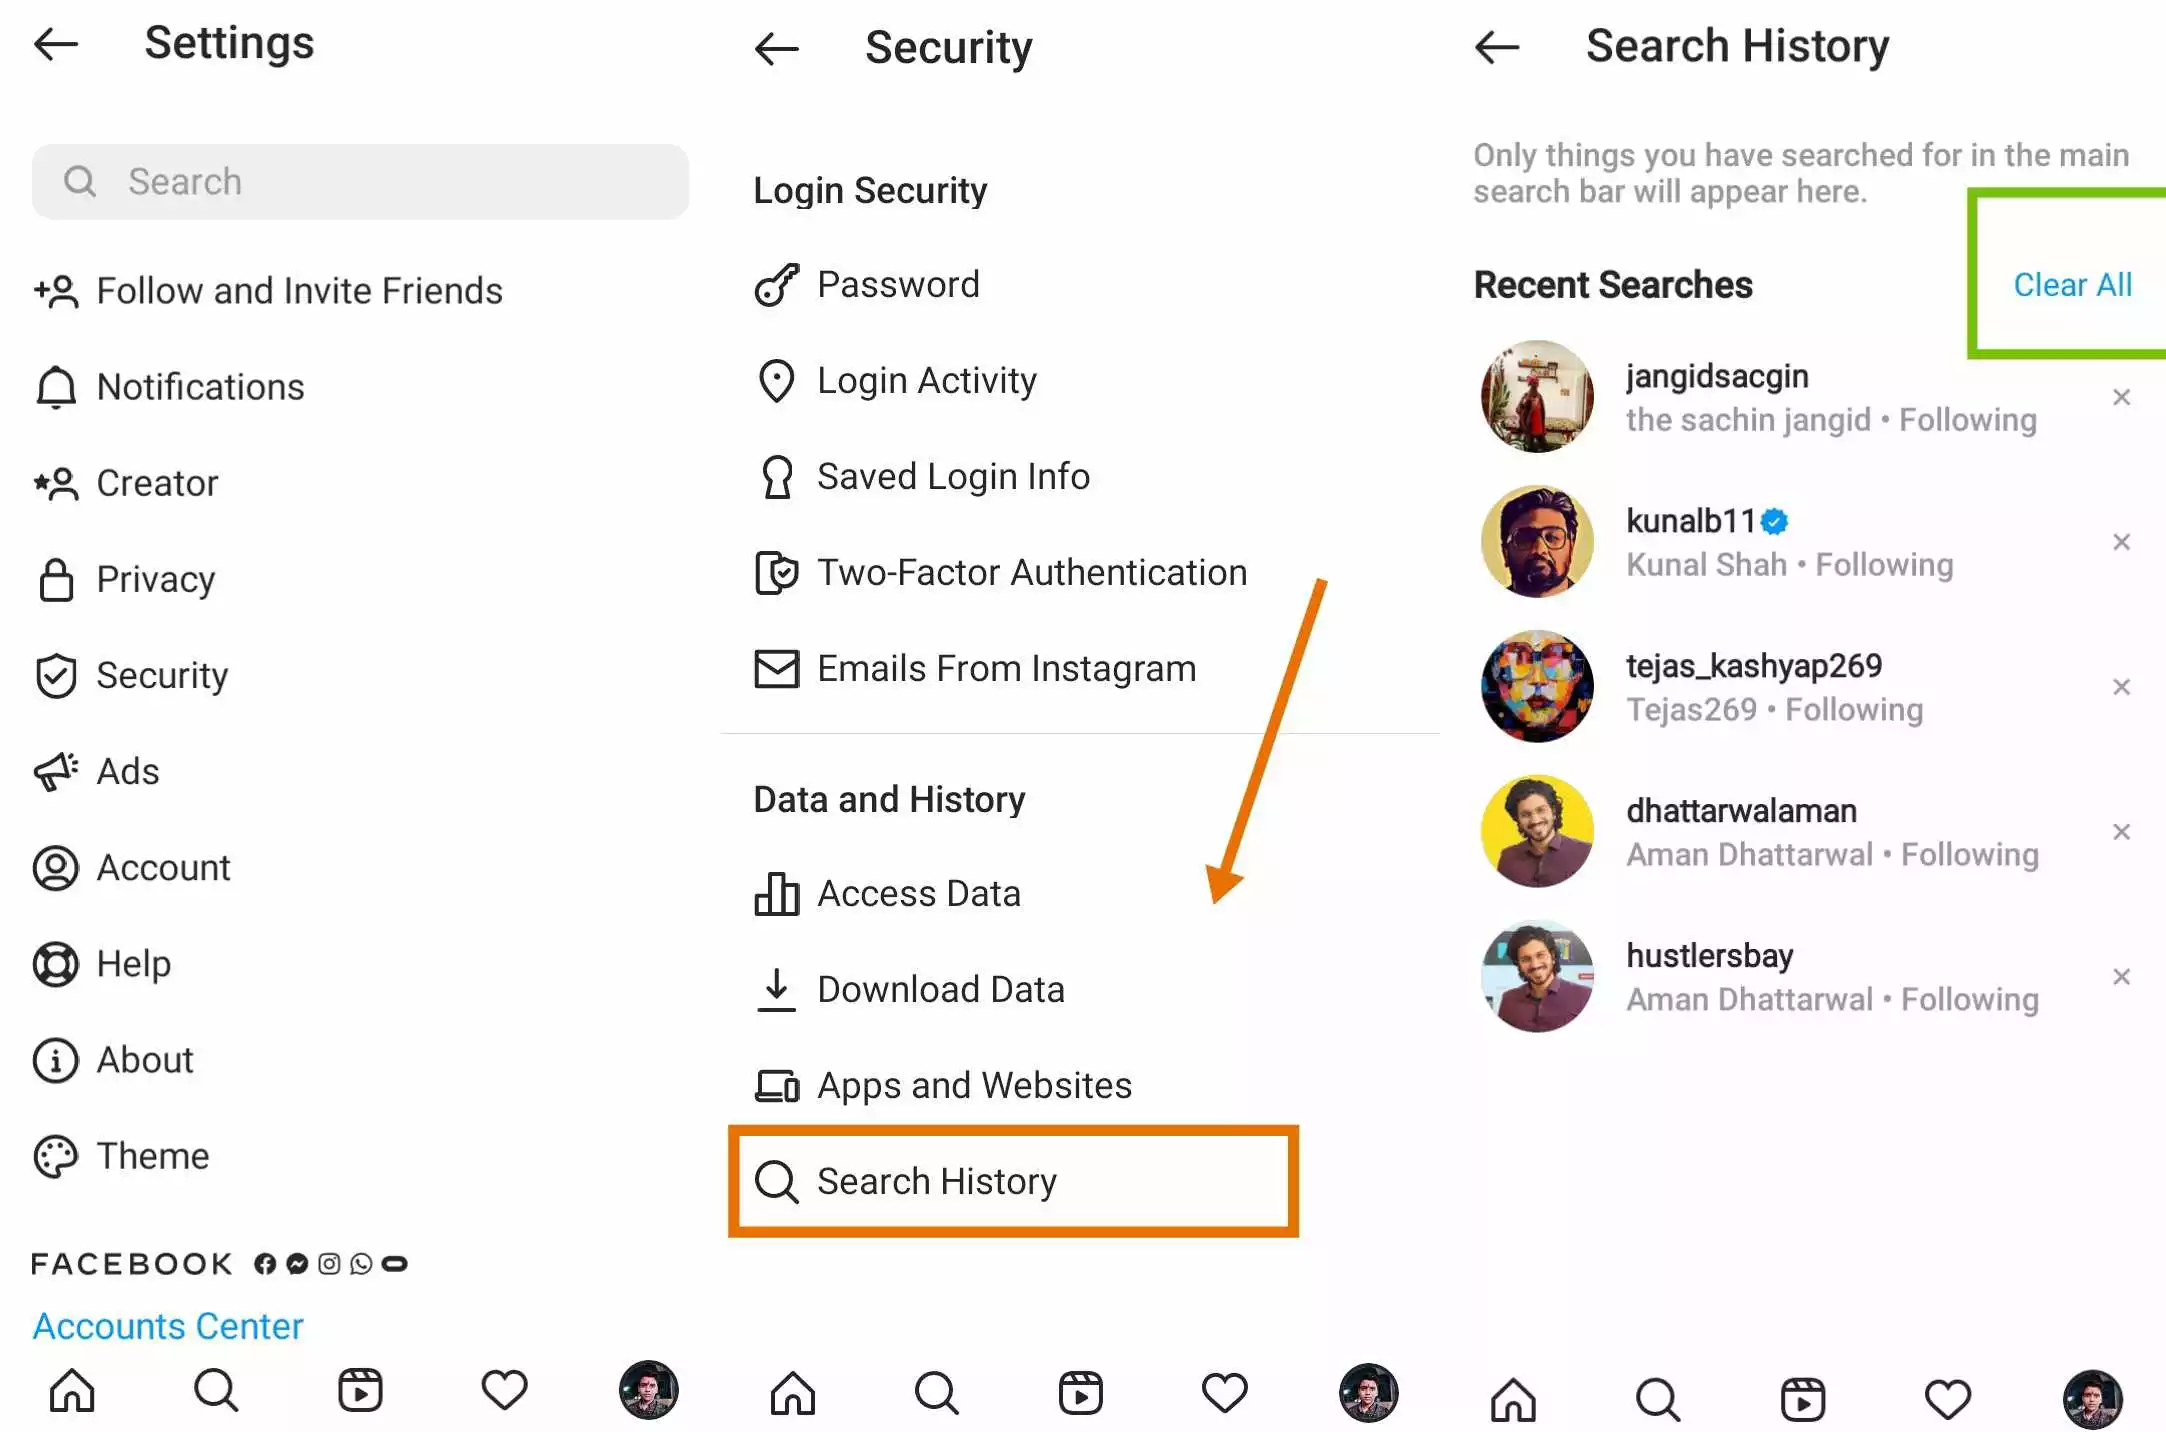 Another method to clear cache files on instagram